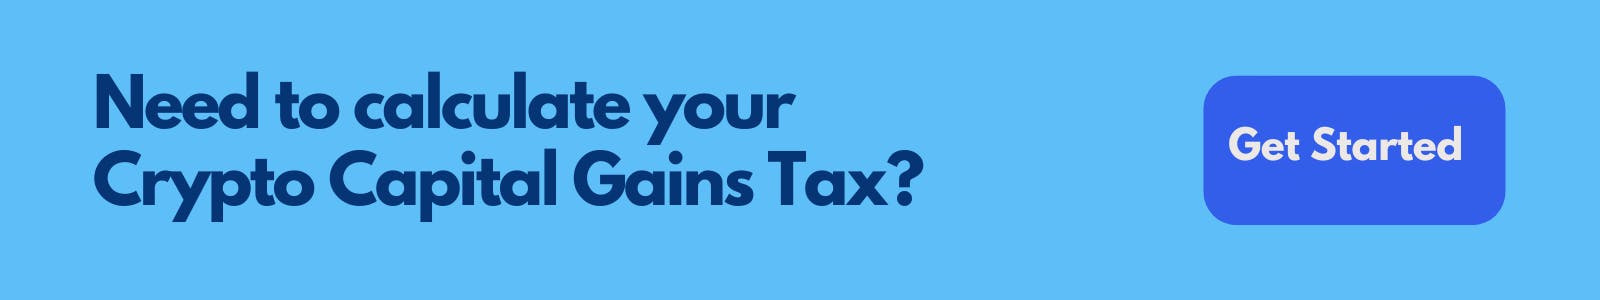 Calculate crypto tax with Koinly crypto tax software